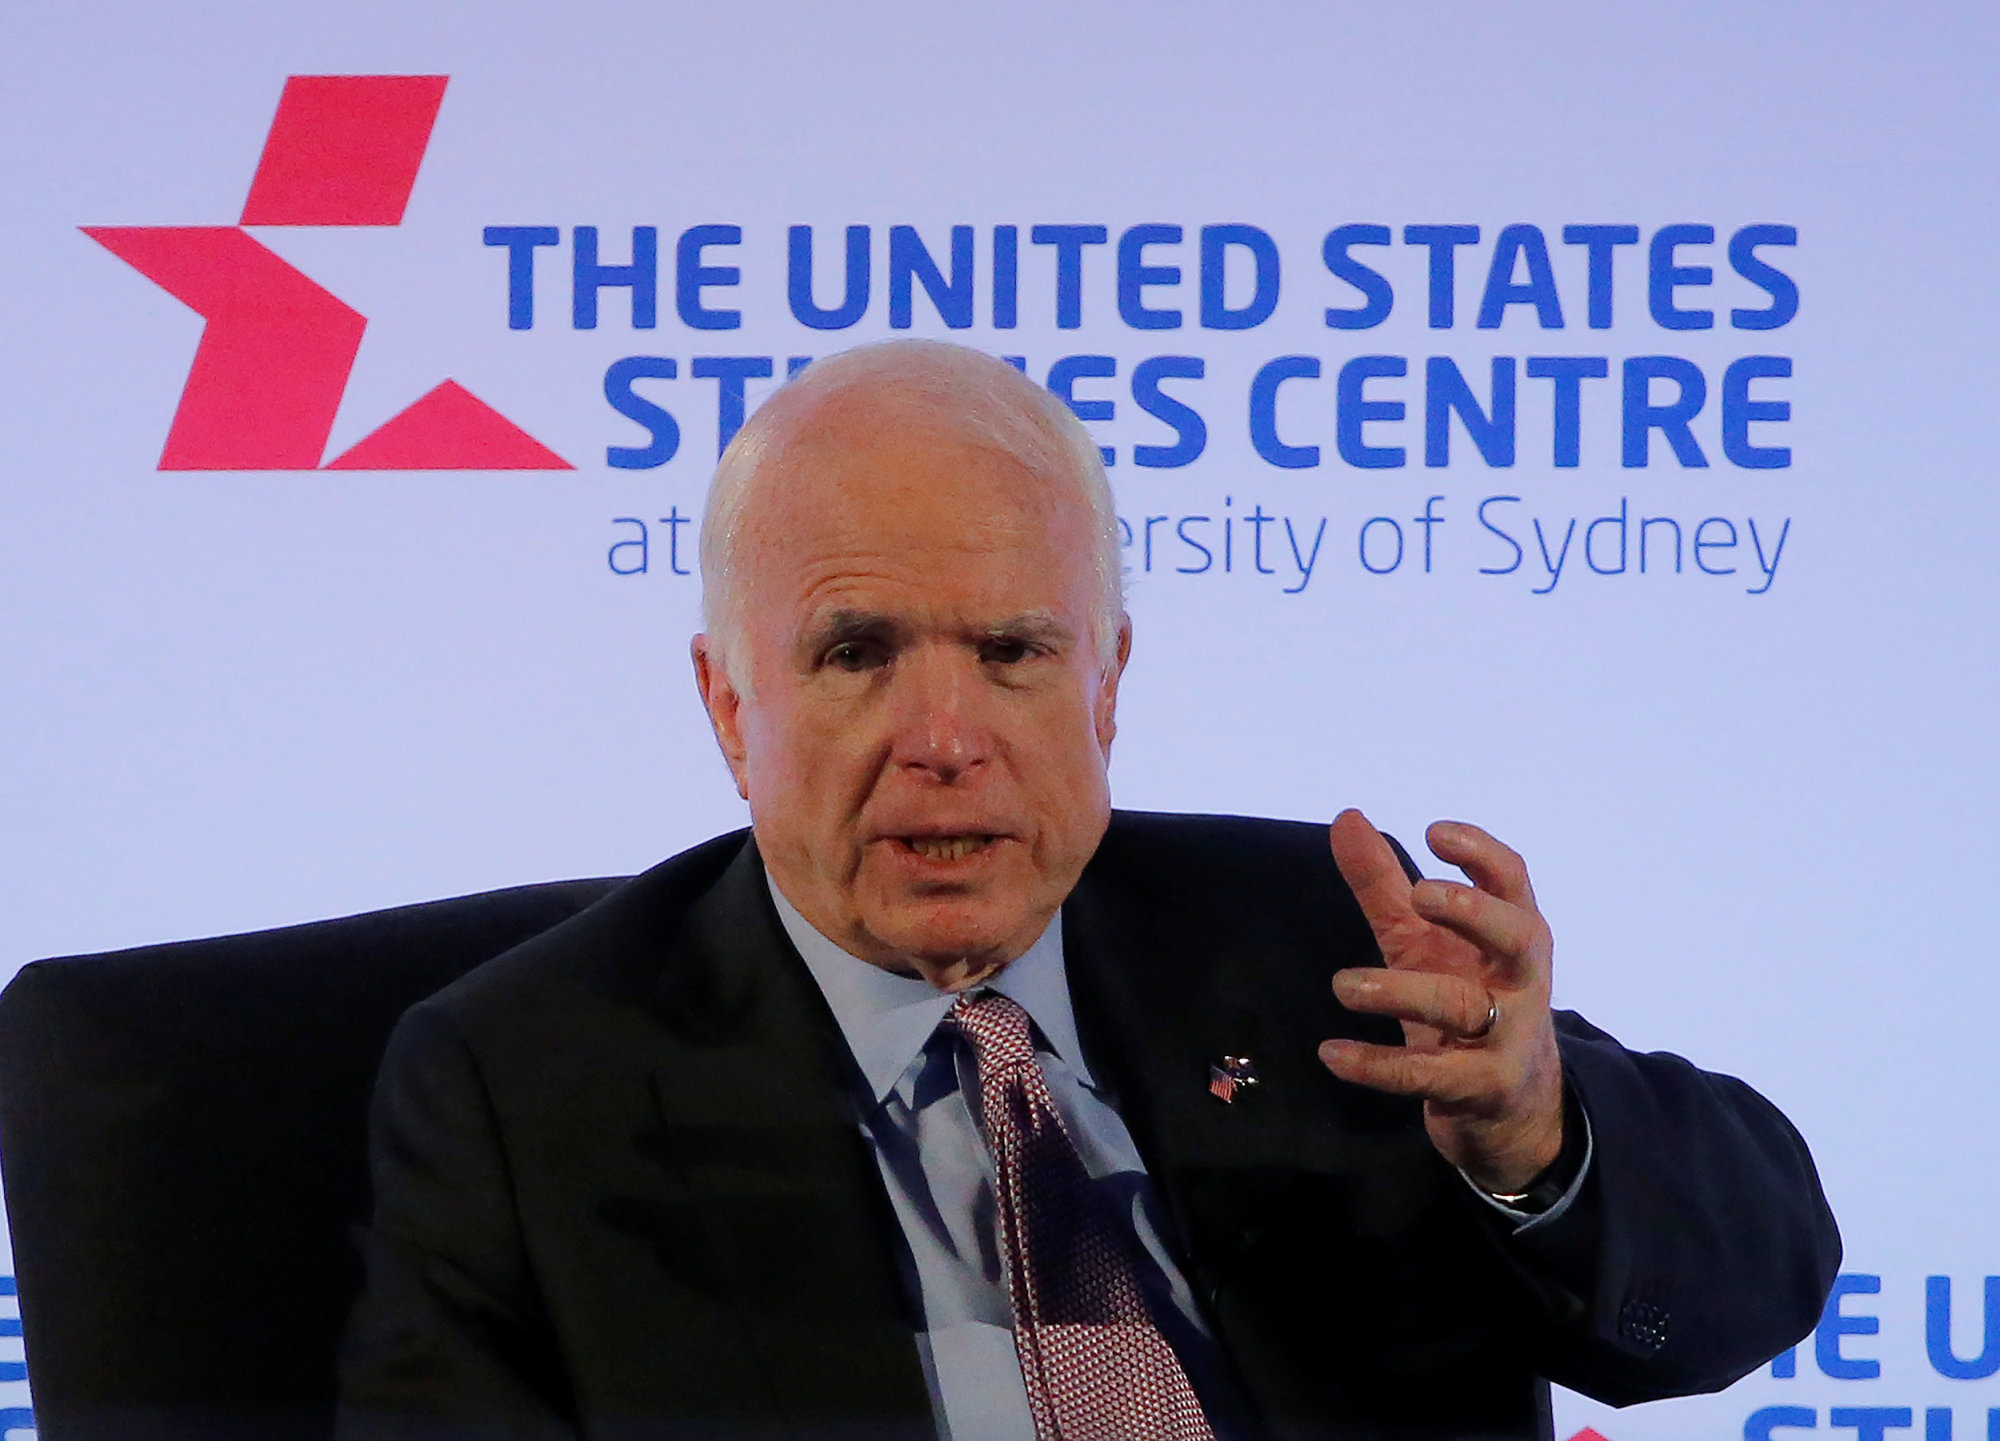 U.S. Sen. John McCain speaks at a United States Studies Centre event in Sydney Tuesday. | REUTERS